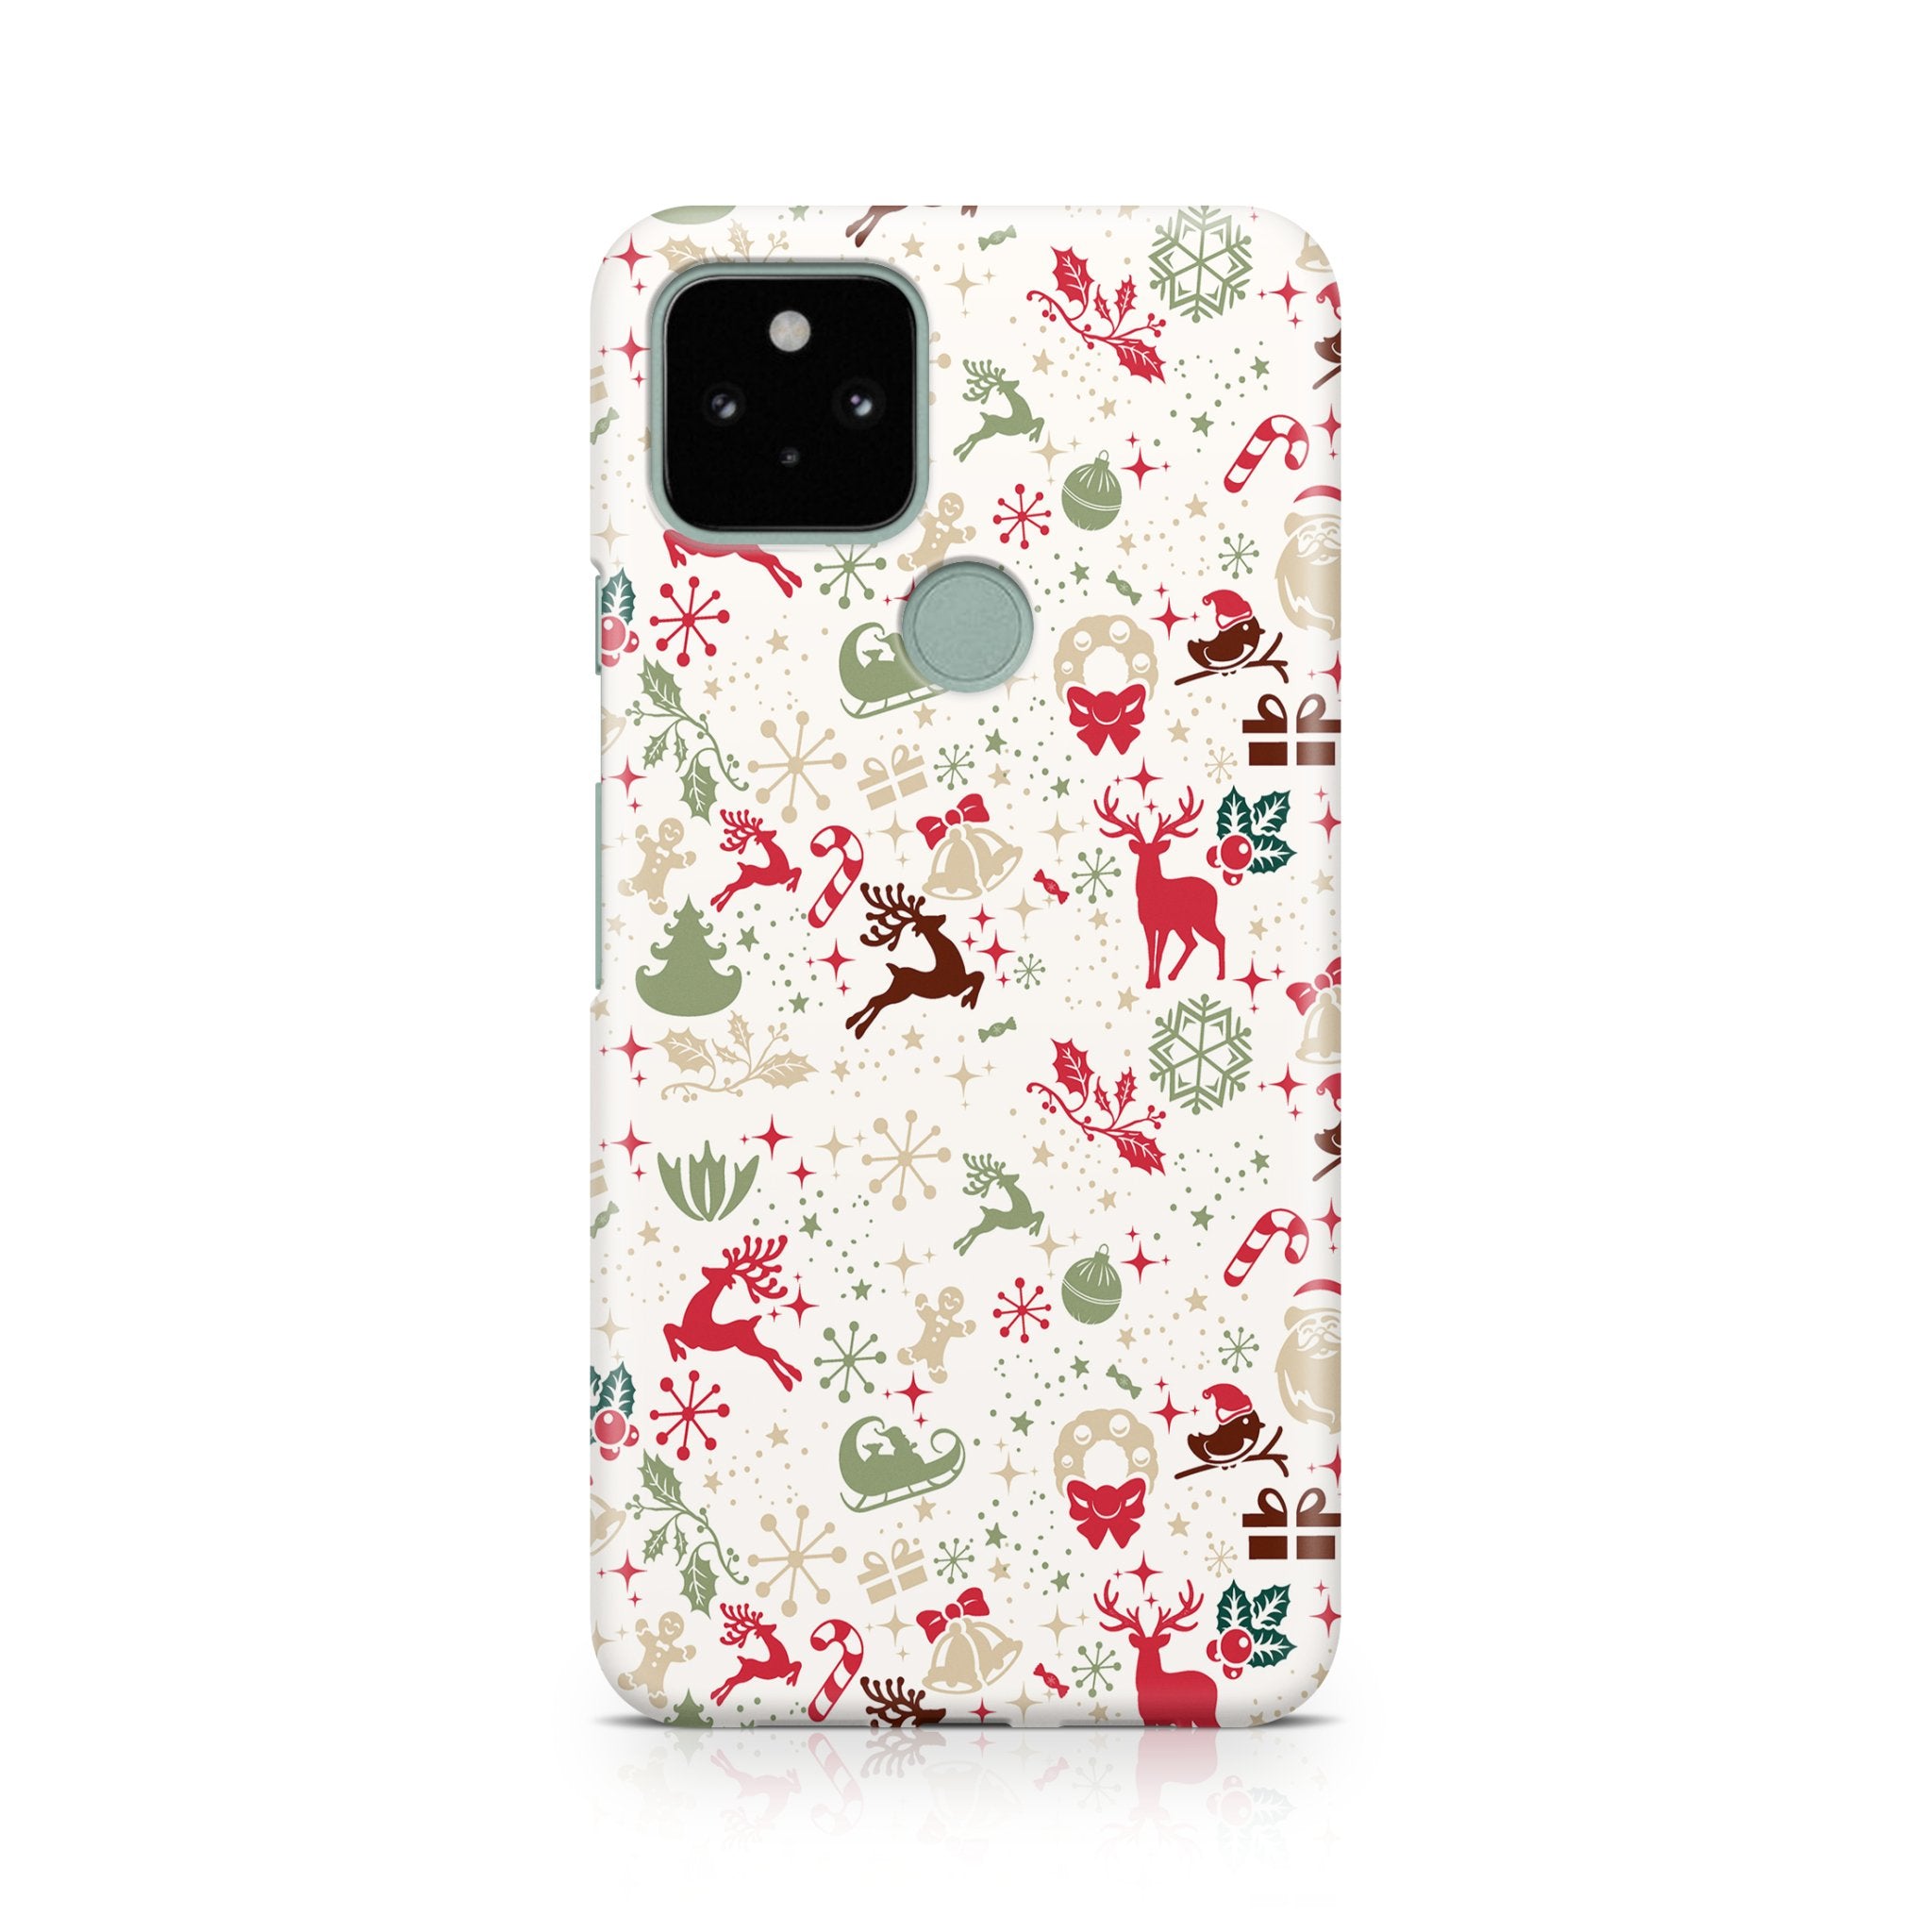 Tinsel Town Treasures - Google phone case designs by CaseSwagger